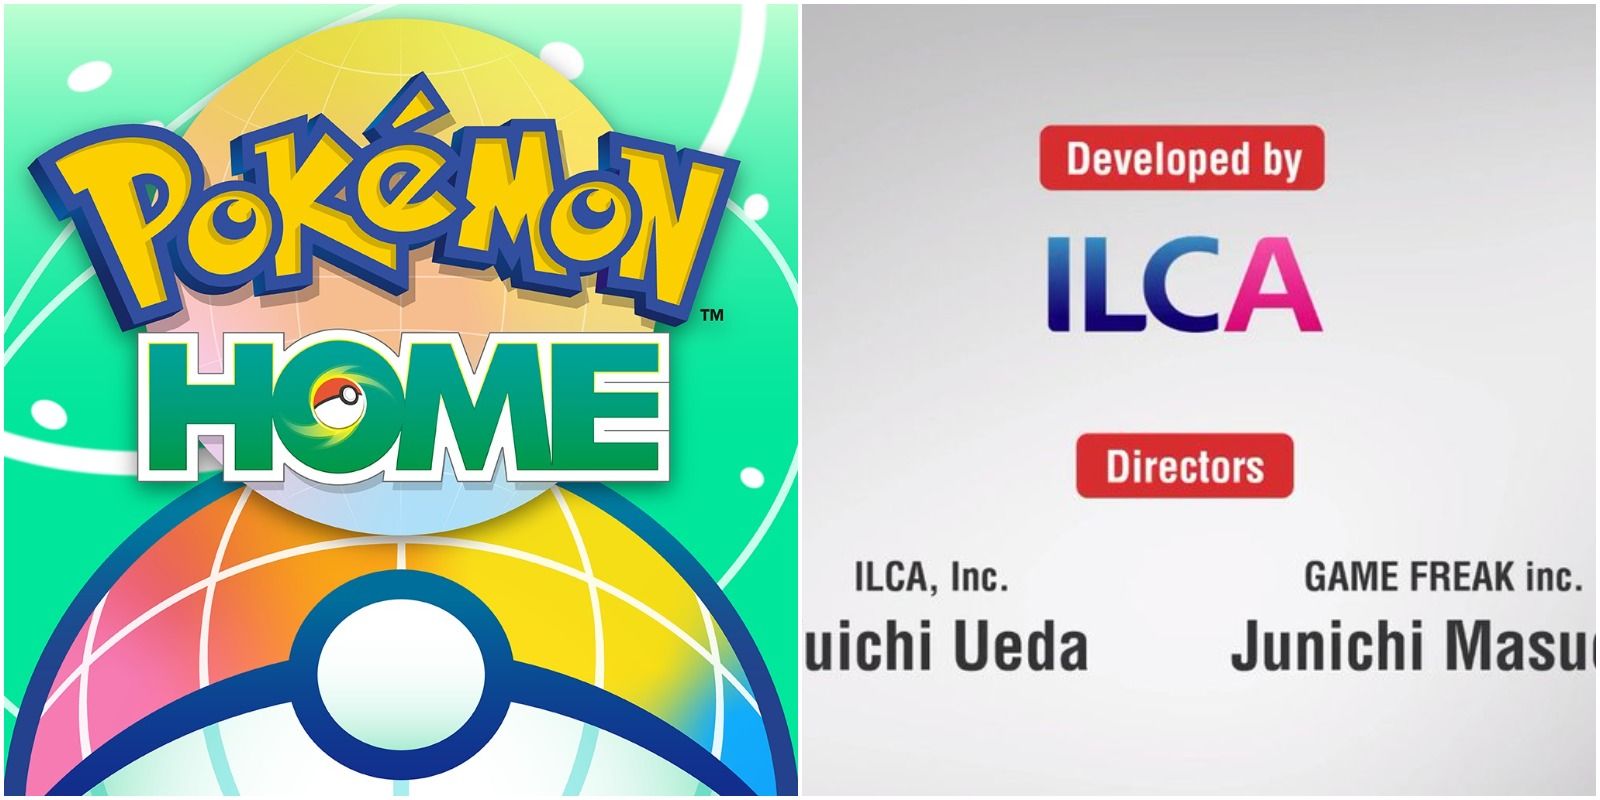 Pokémon HOME app, developed by ILCA of the upcoming Diamond and Pearl remakes